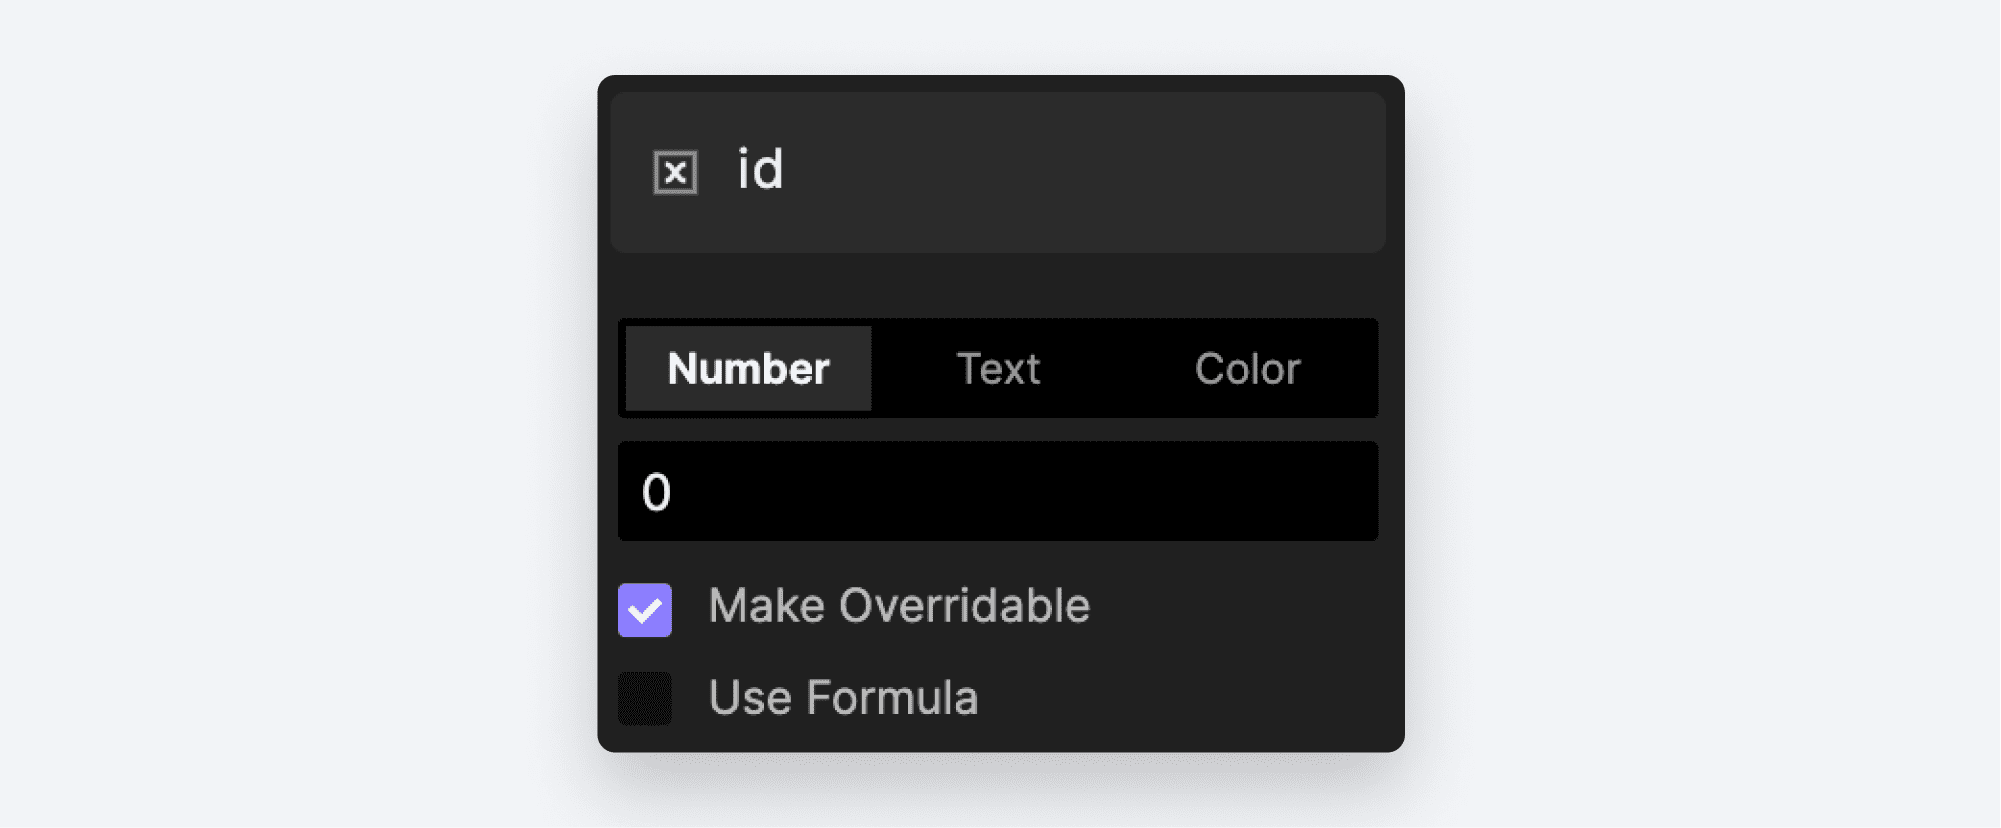 Create a variable called id